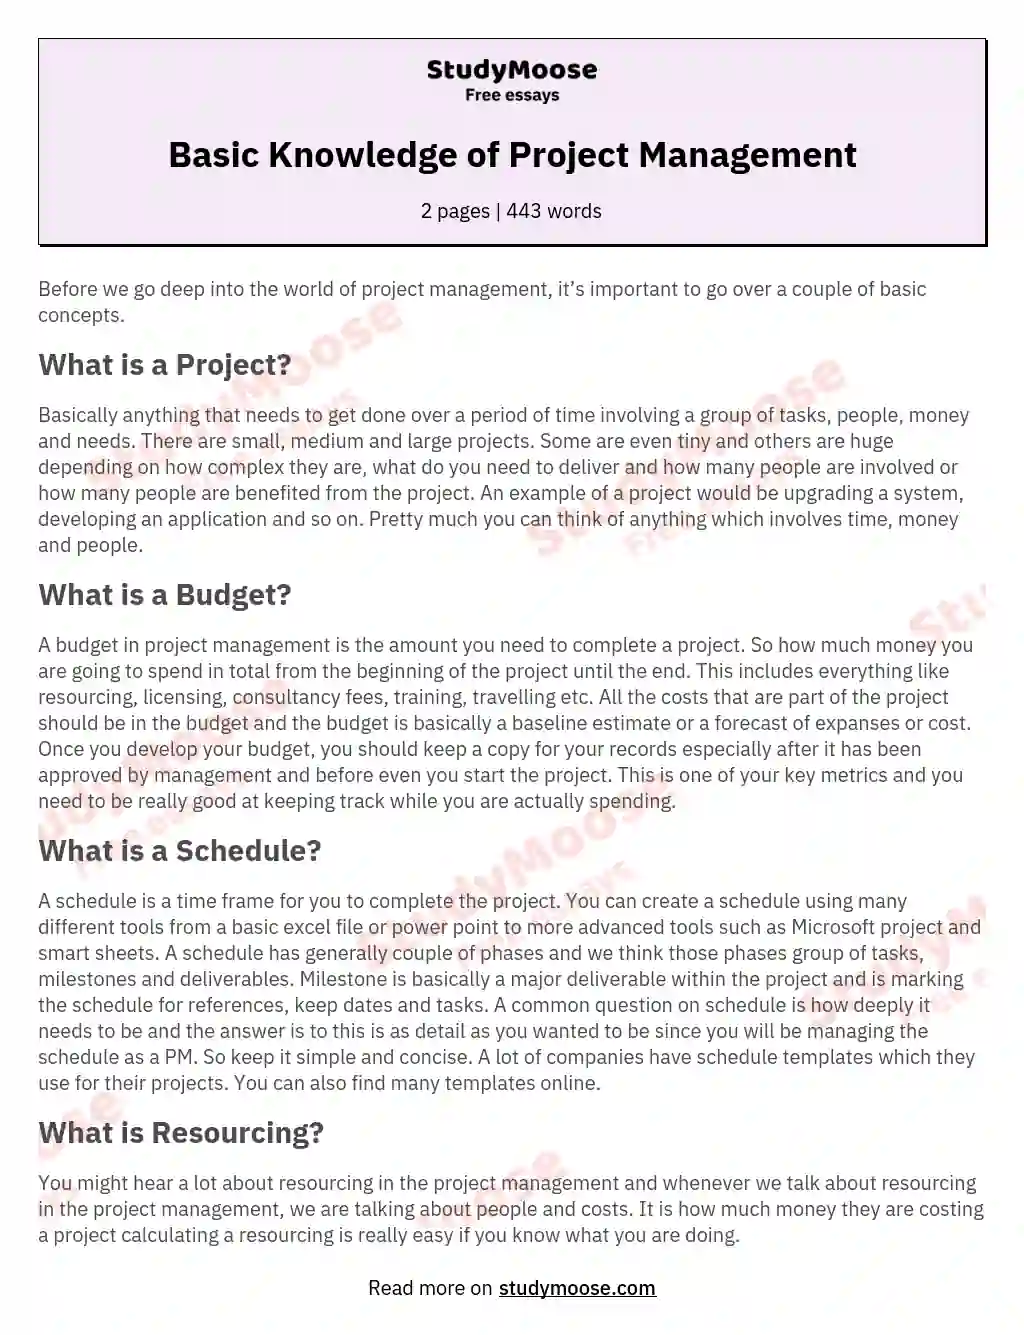 Basic Knowledge of Project Management essay